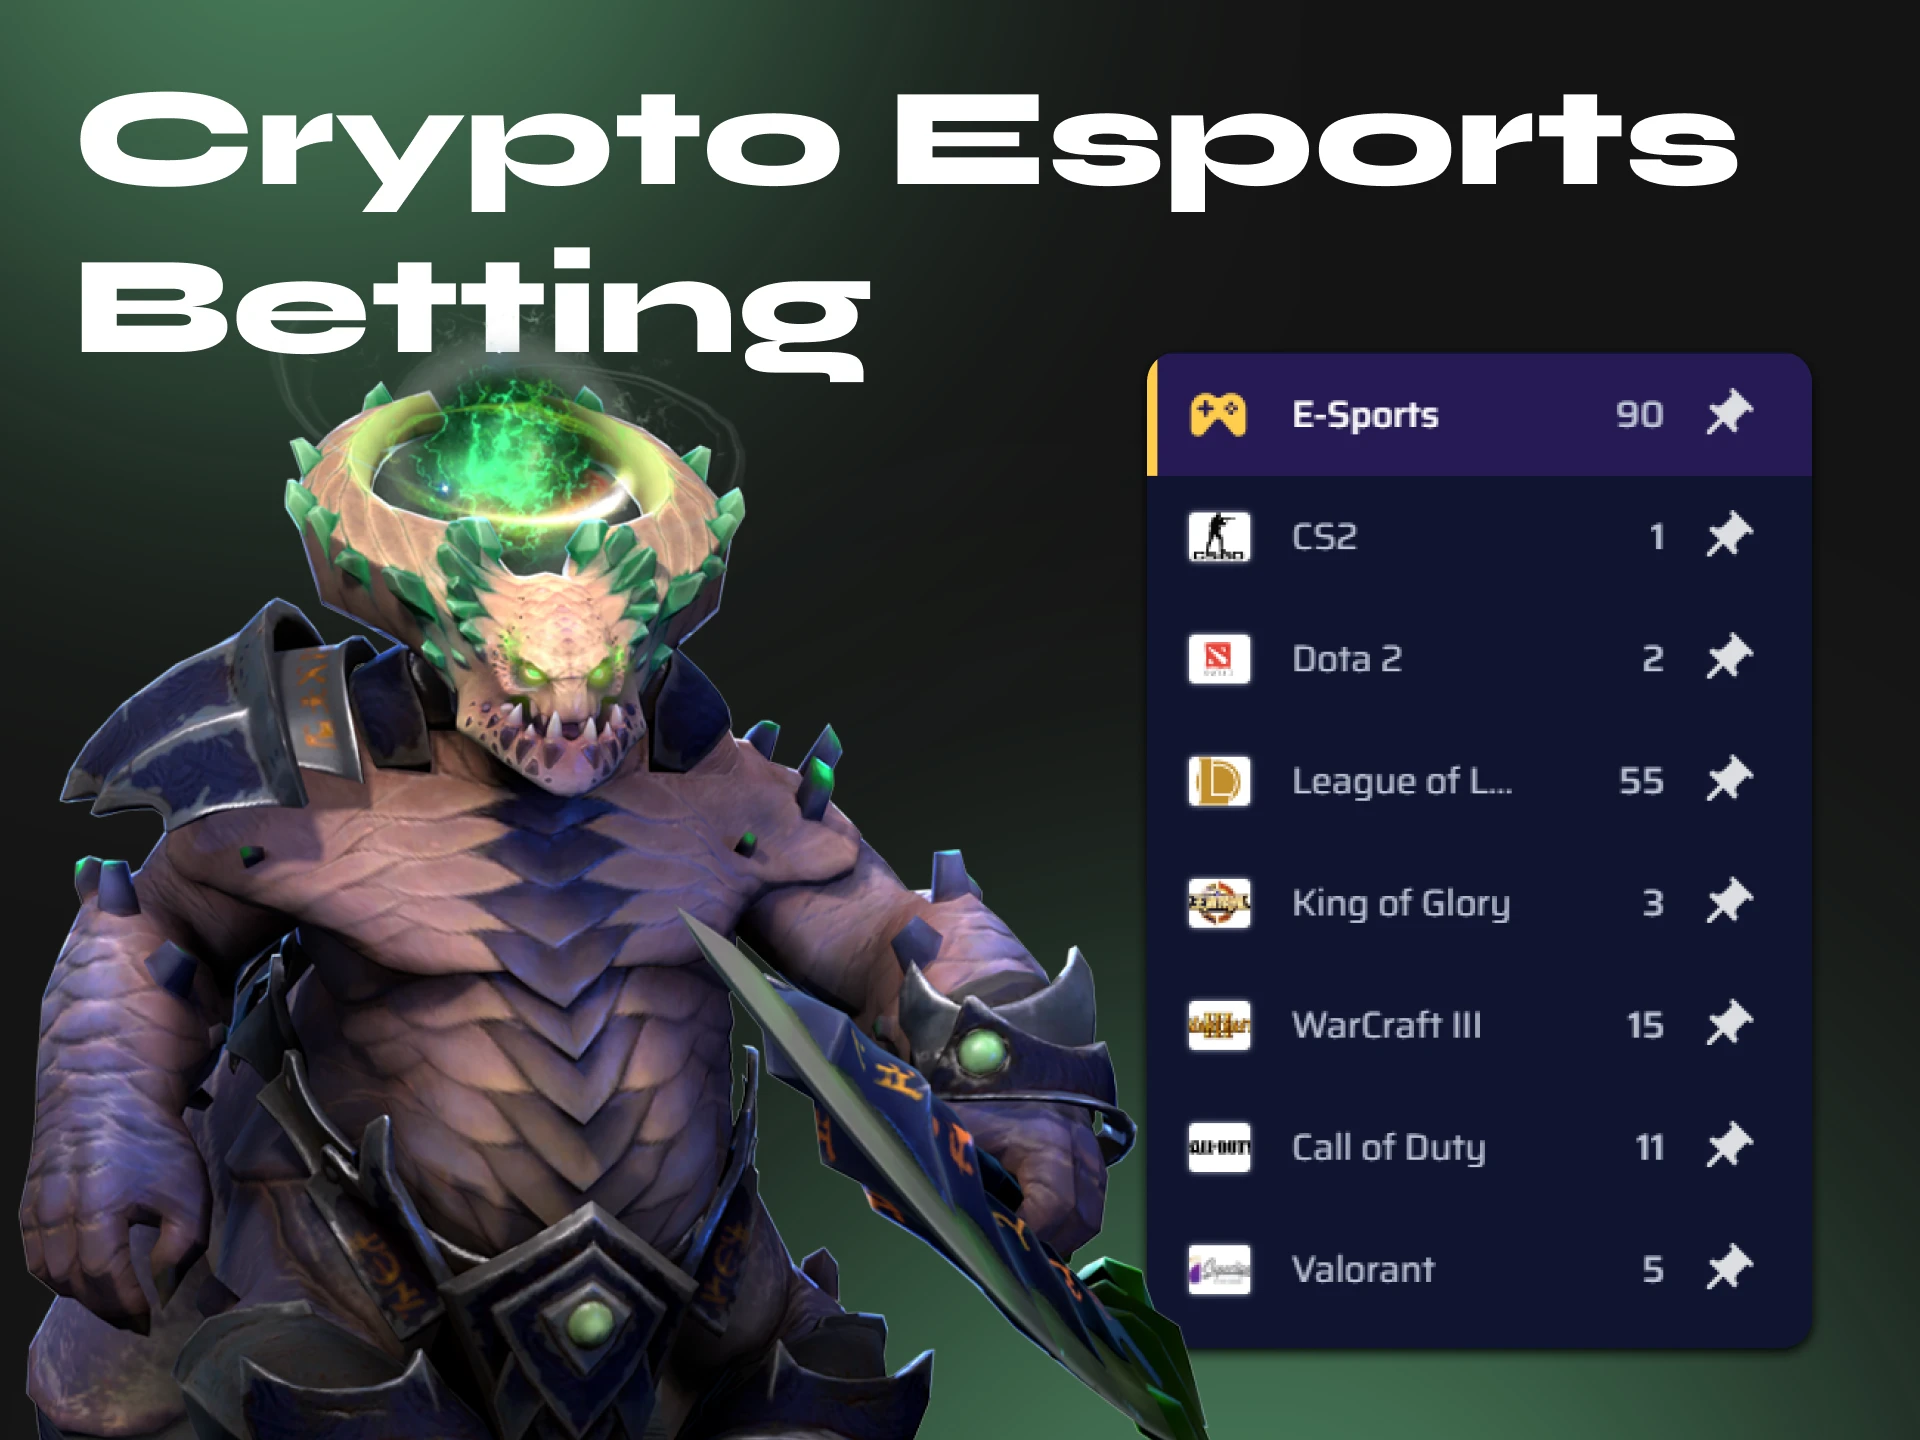 Place bets on your favorite eSports events using cryptocurrency at the casino.